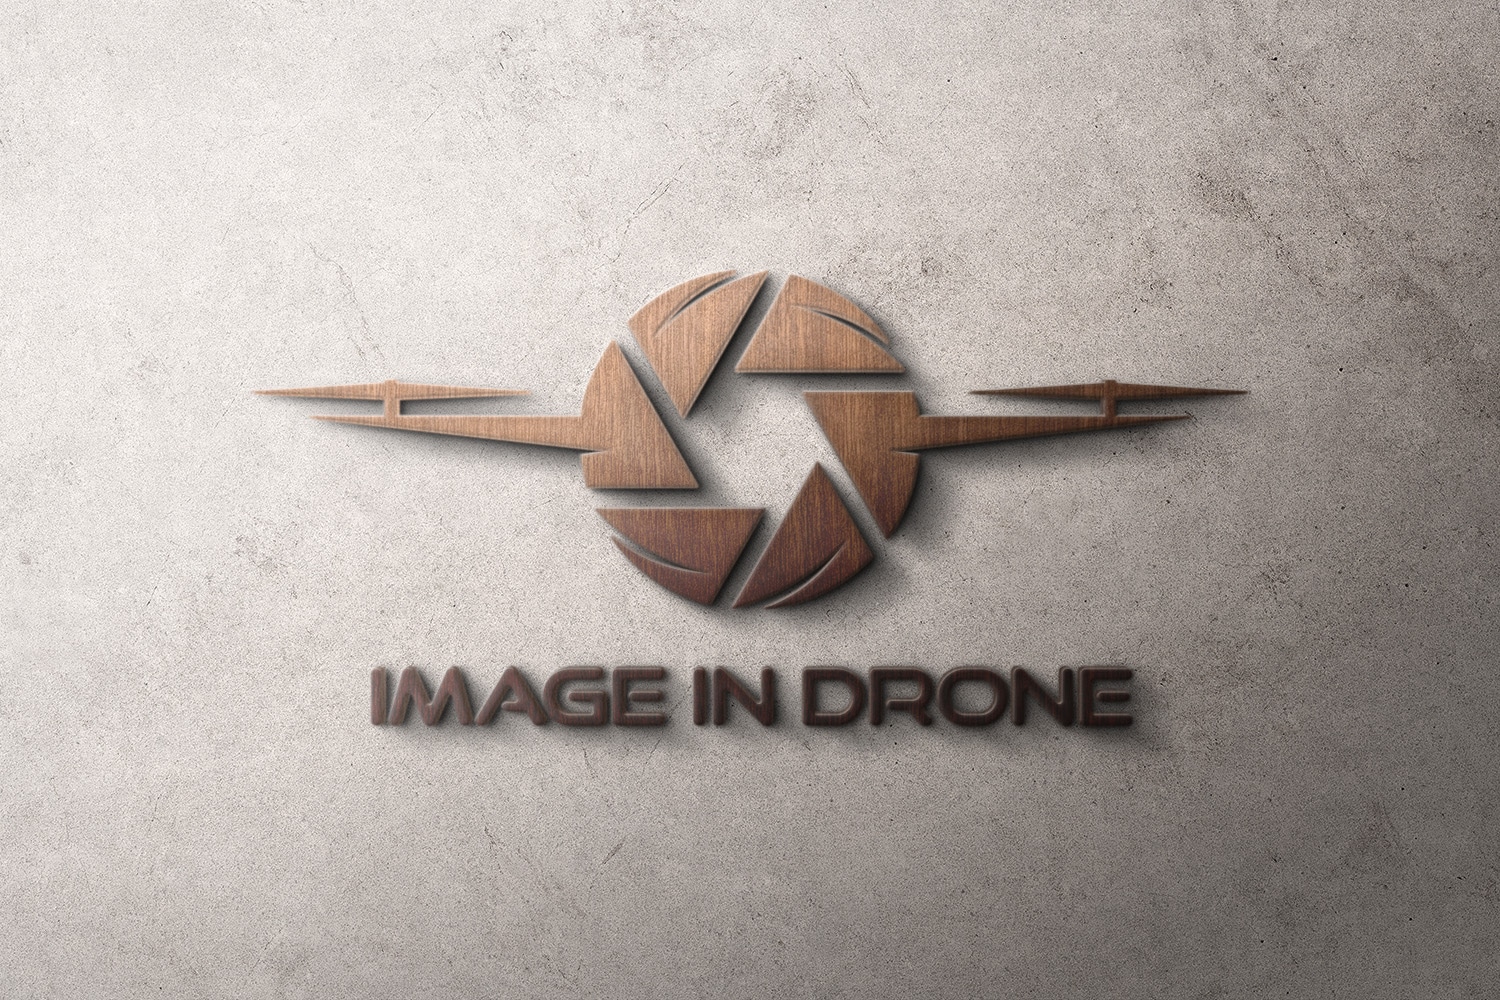 Logotype IMAGE IN DRONE